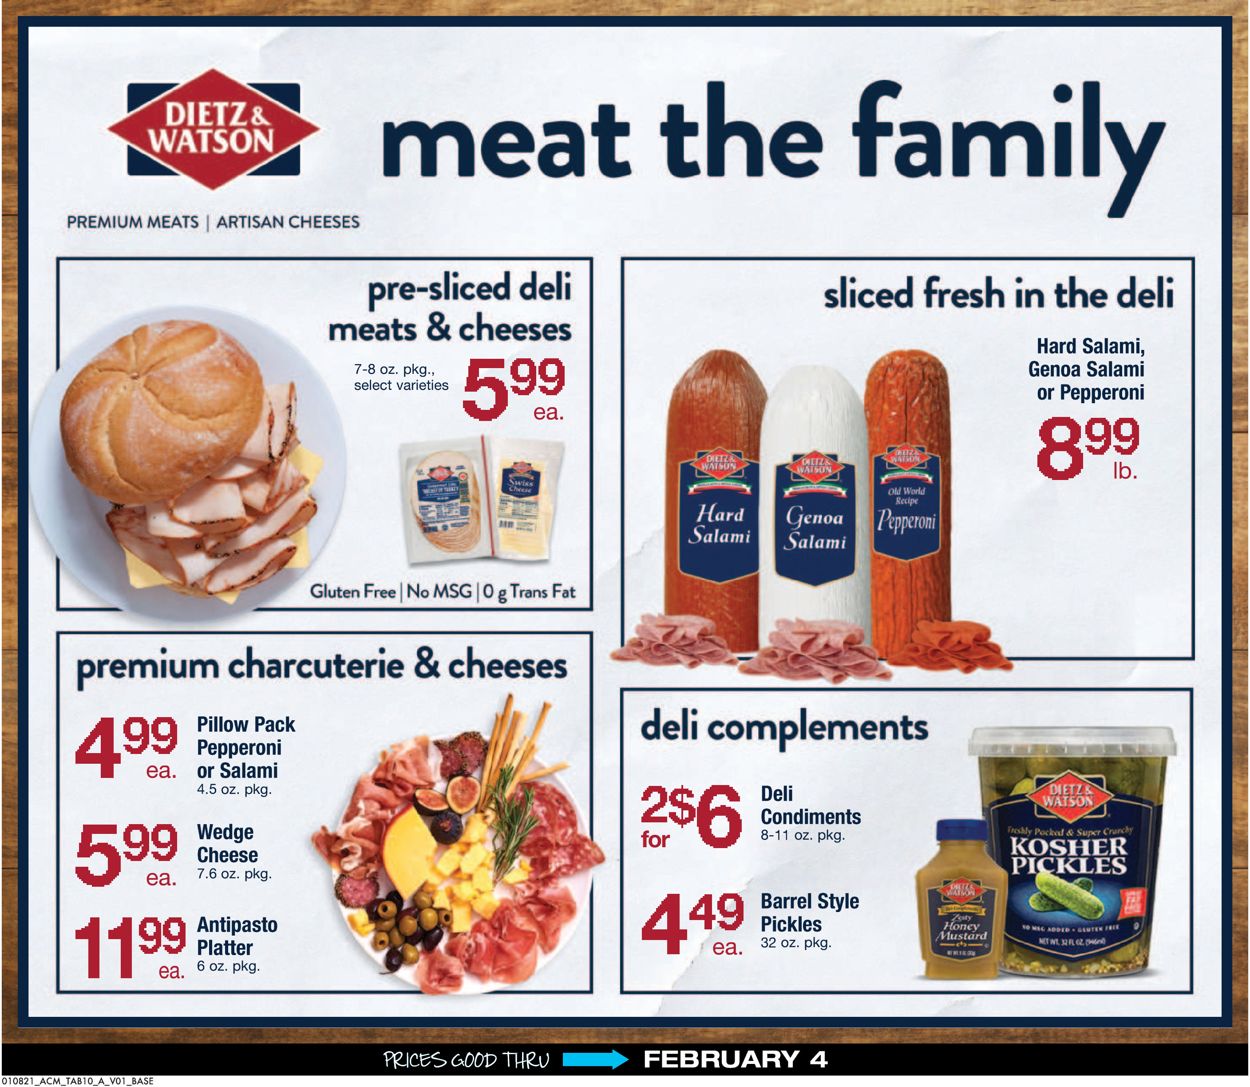 Acme Ad from 01/08/2021